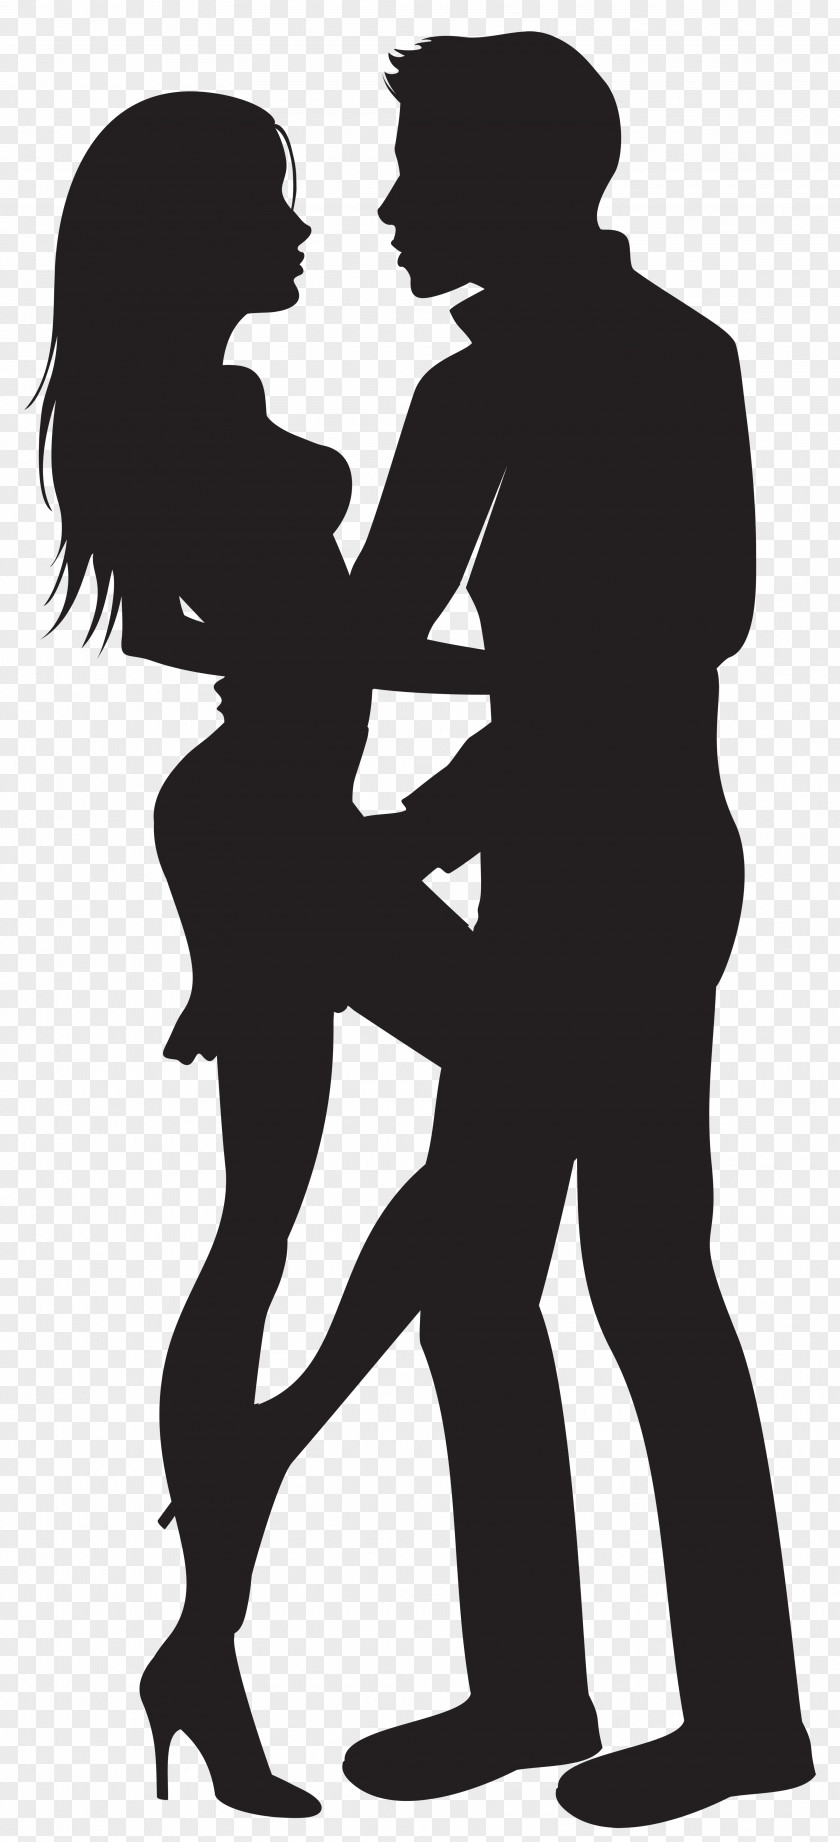 Couple Silhouettes Clip Art Image PNG